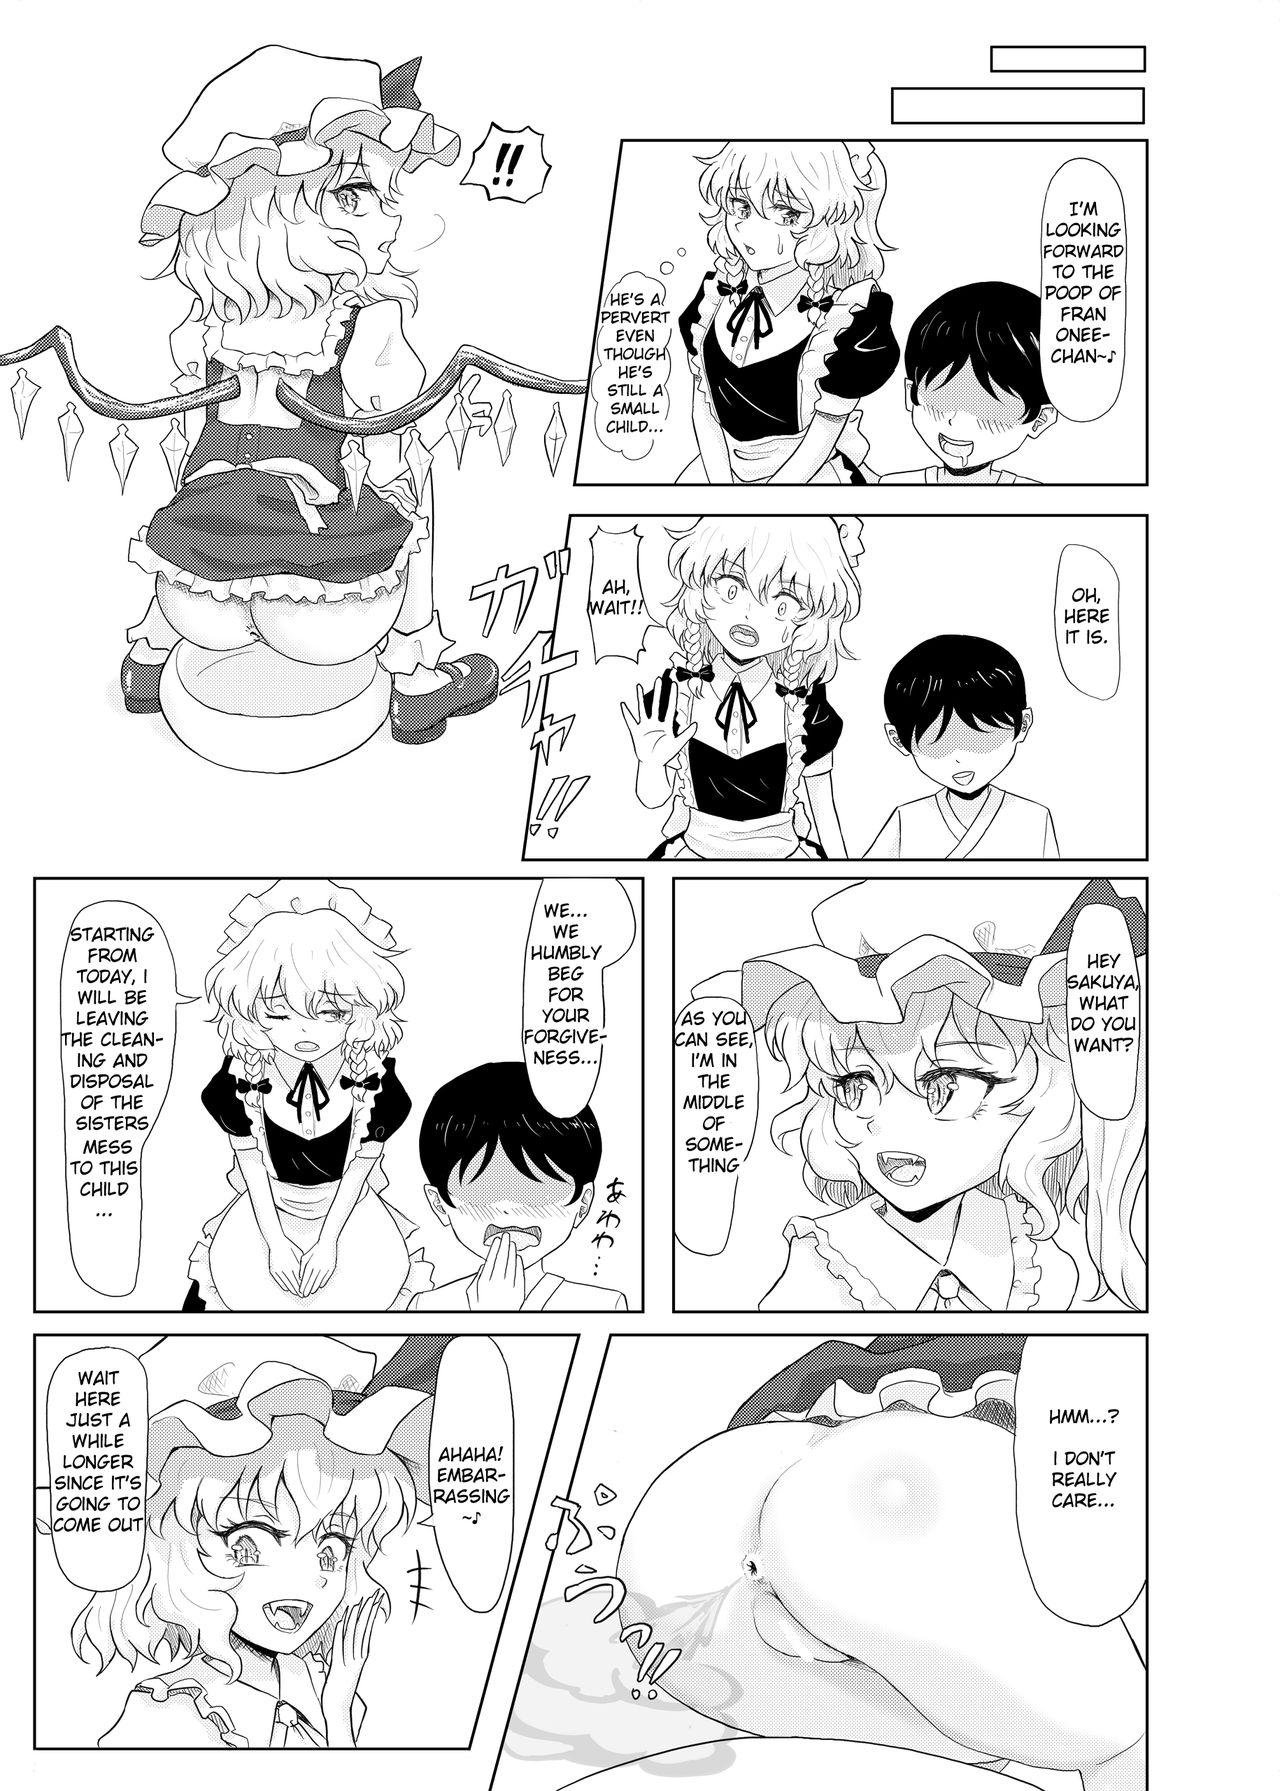 Star Akuma no Yakata no Omaru Jijou | The Toilet situation of the Devils Mansion - Touhou project Pussy Licking - Page 3